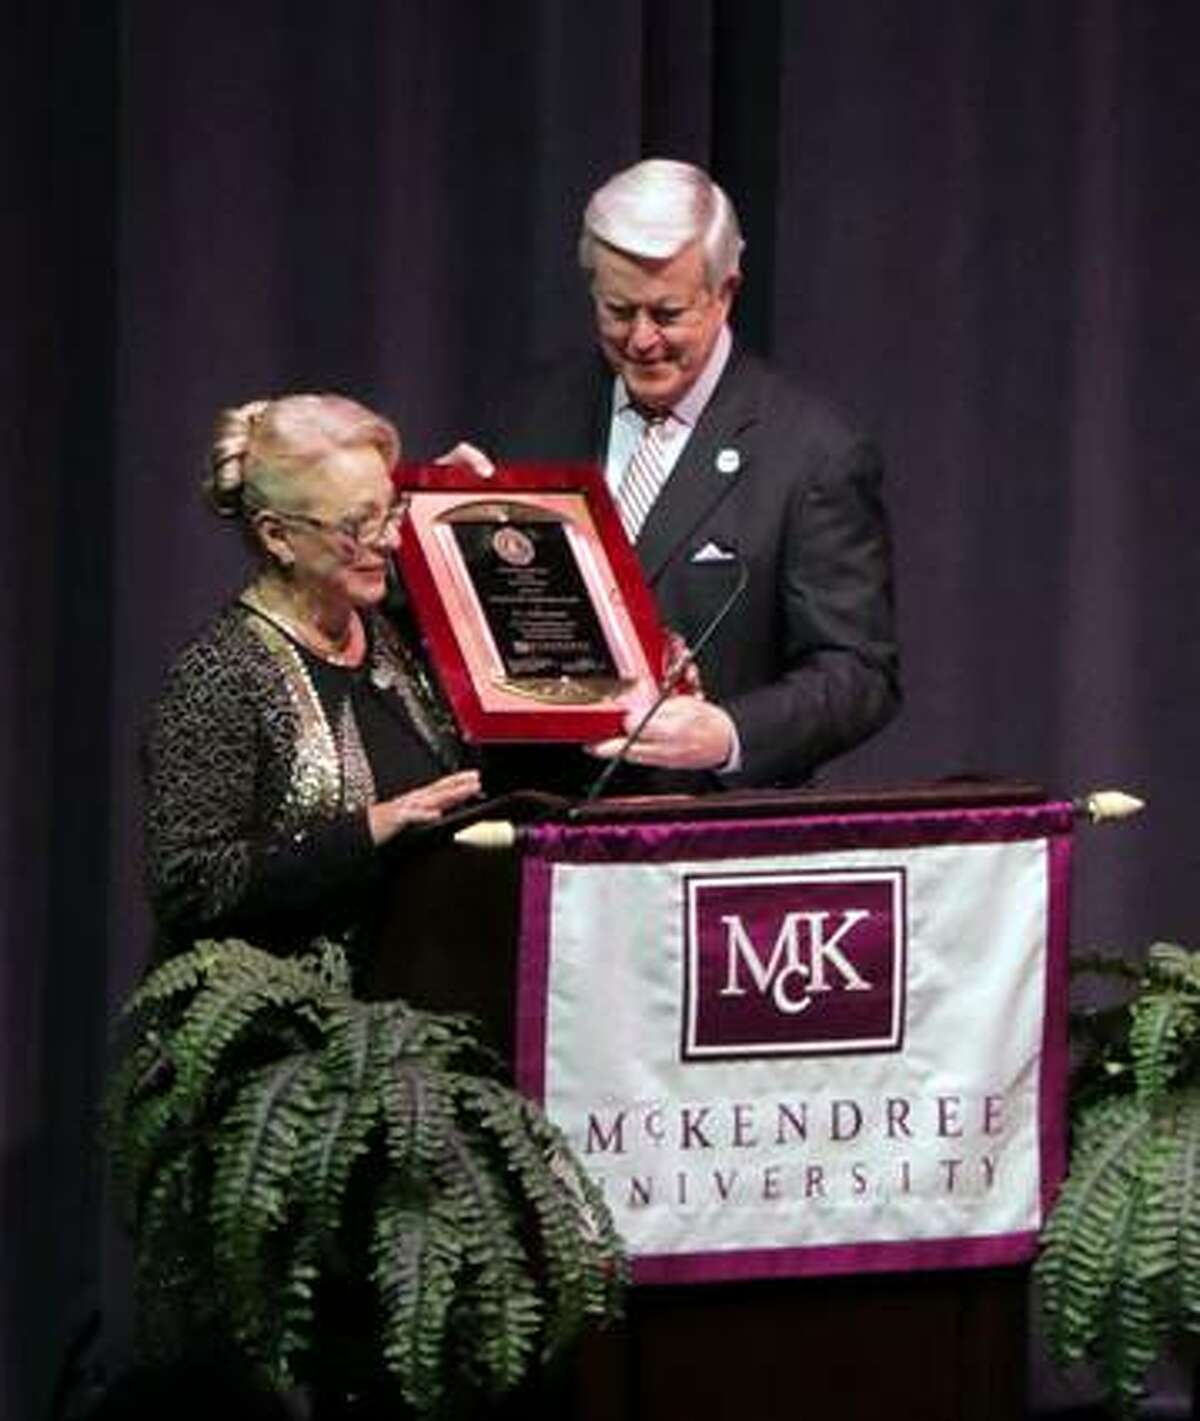 Dr. Linda Cassens accepts the 2018 Friend of the University Award from Dr. James Dennis, McKendree University president, at the Founders’ Day 190th anniversary celebration on Feb. 20 at the Hettenhausen Center for the Arts on campus.